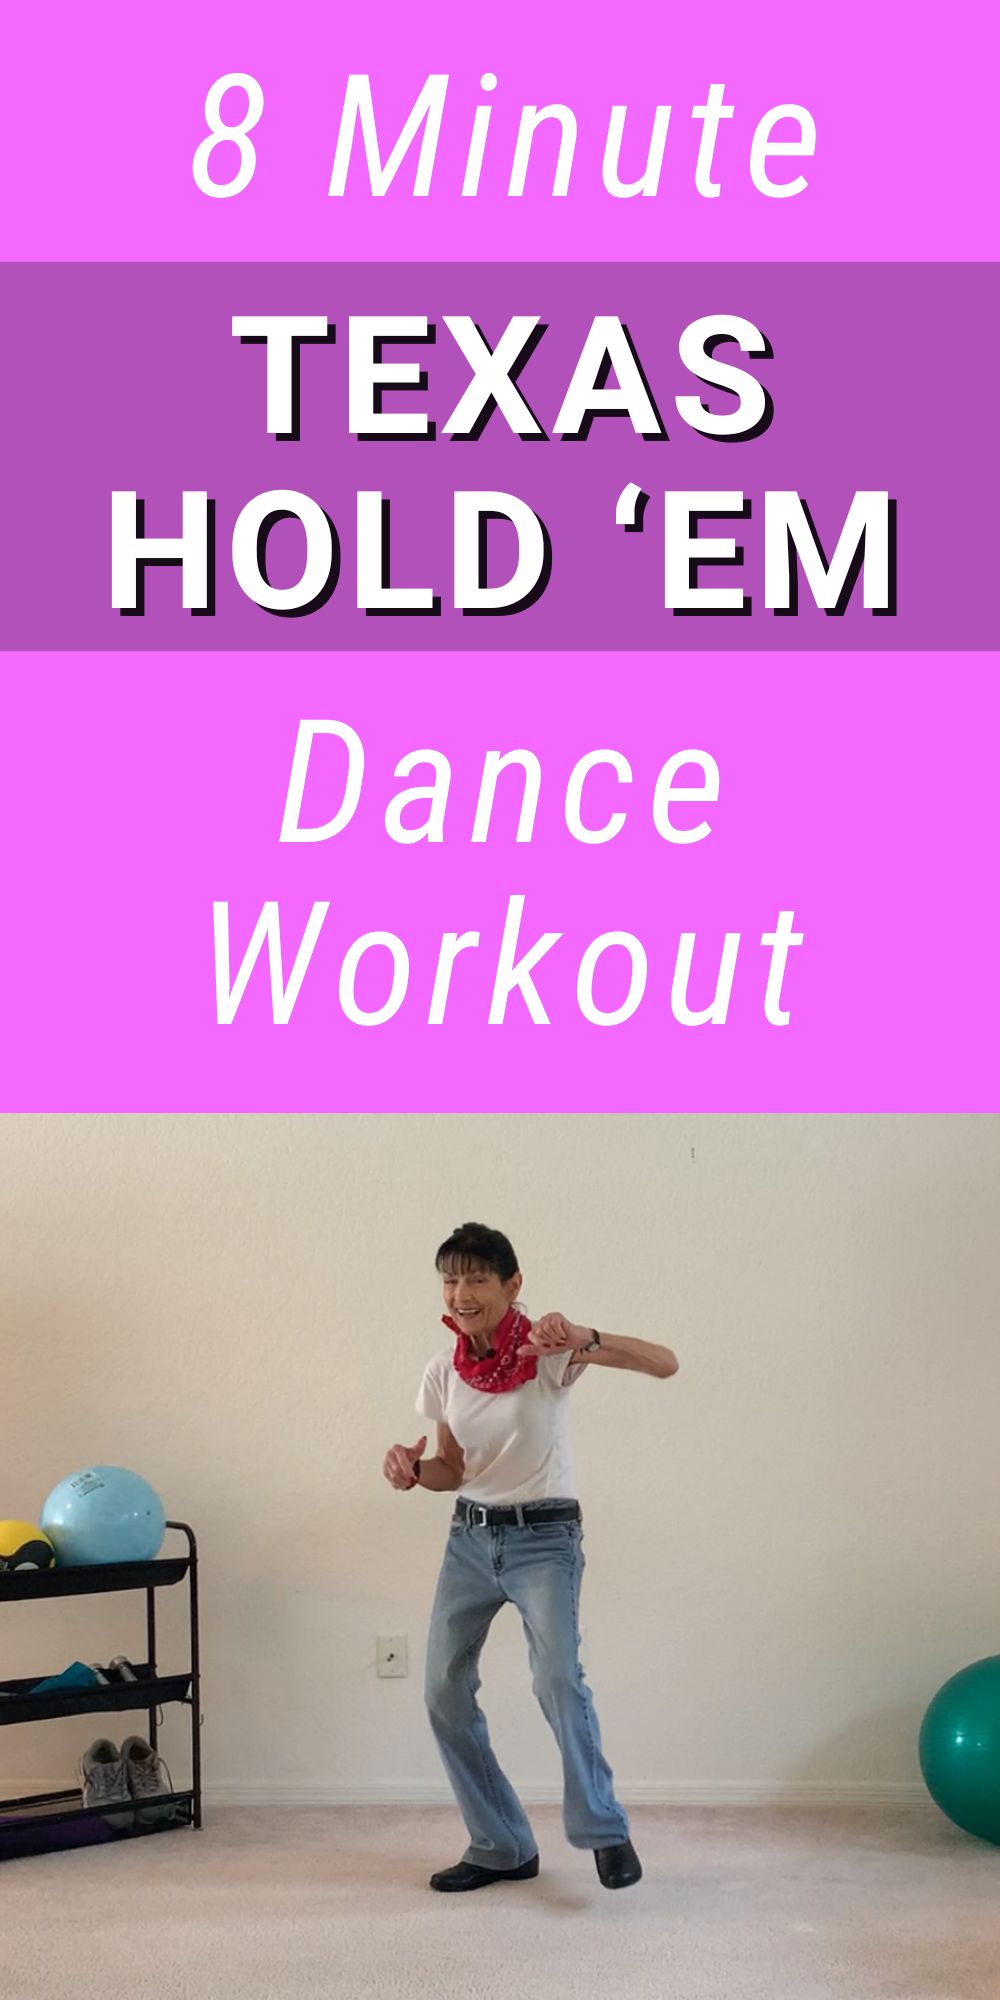 Give your energy a boost in just 8 minutes with this fun Texas Hold 'Em dance workout!